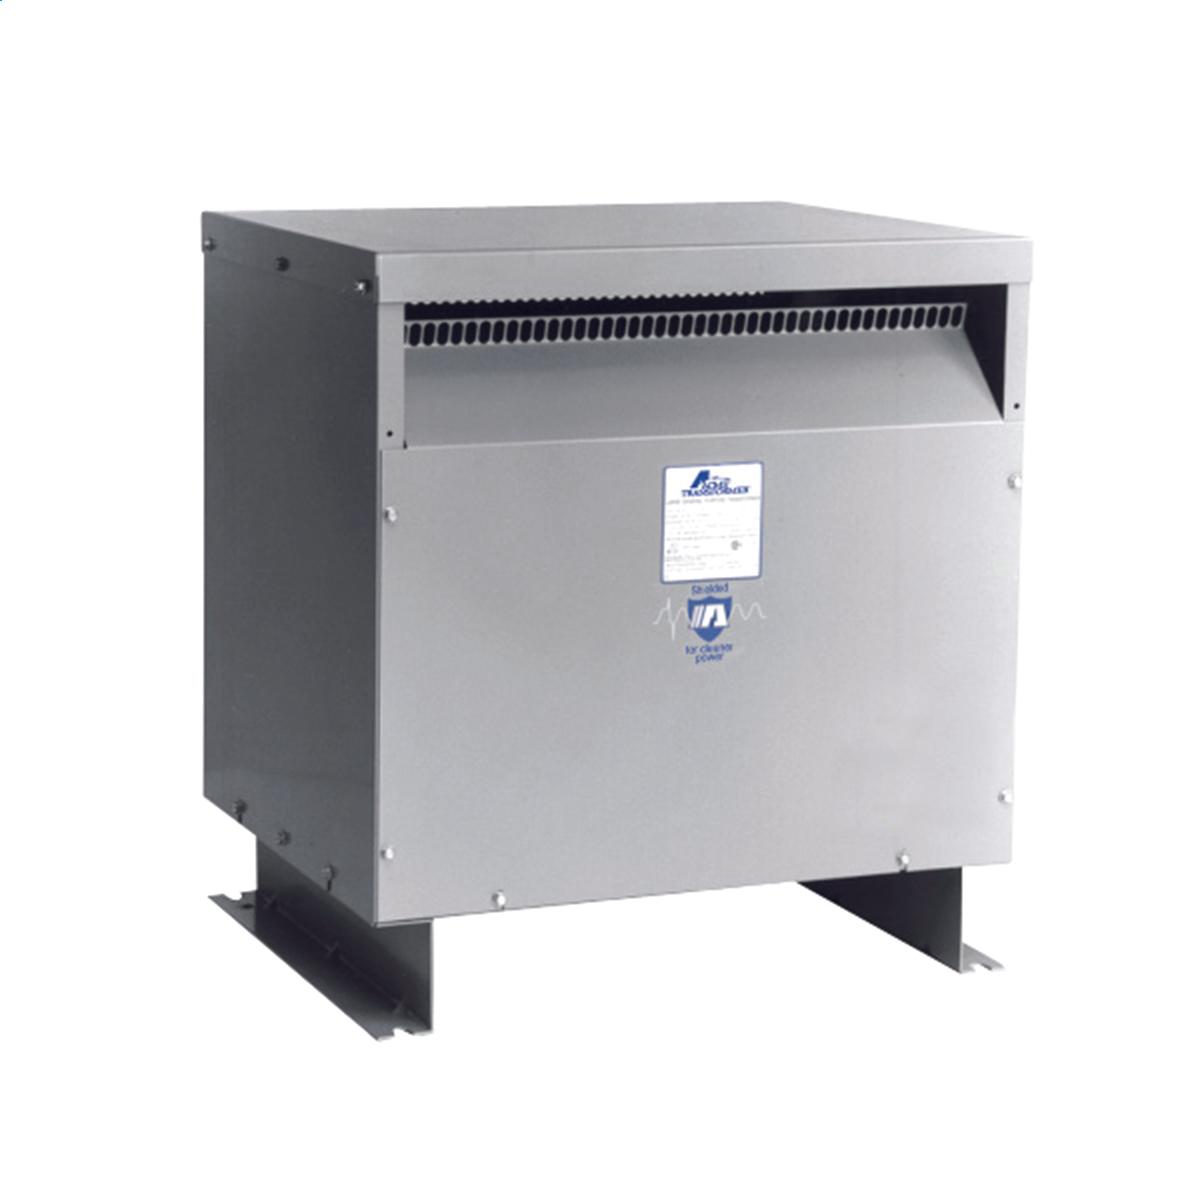 Hubbell WB015K07 Medium Voltage Transformer - Single Phase, 4800 - 120/240V, 15kVA  ; Lower operating cost over Liquid-filled ; No additional fireproofing or venting ; Long life expectancy ; Smaller, lighter easy to maintain